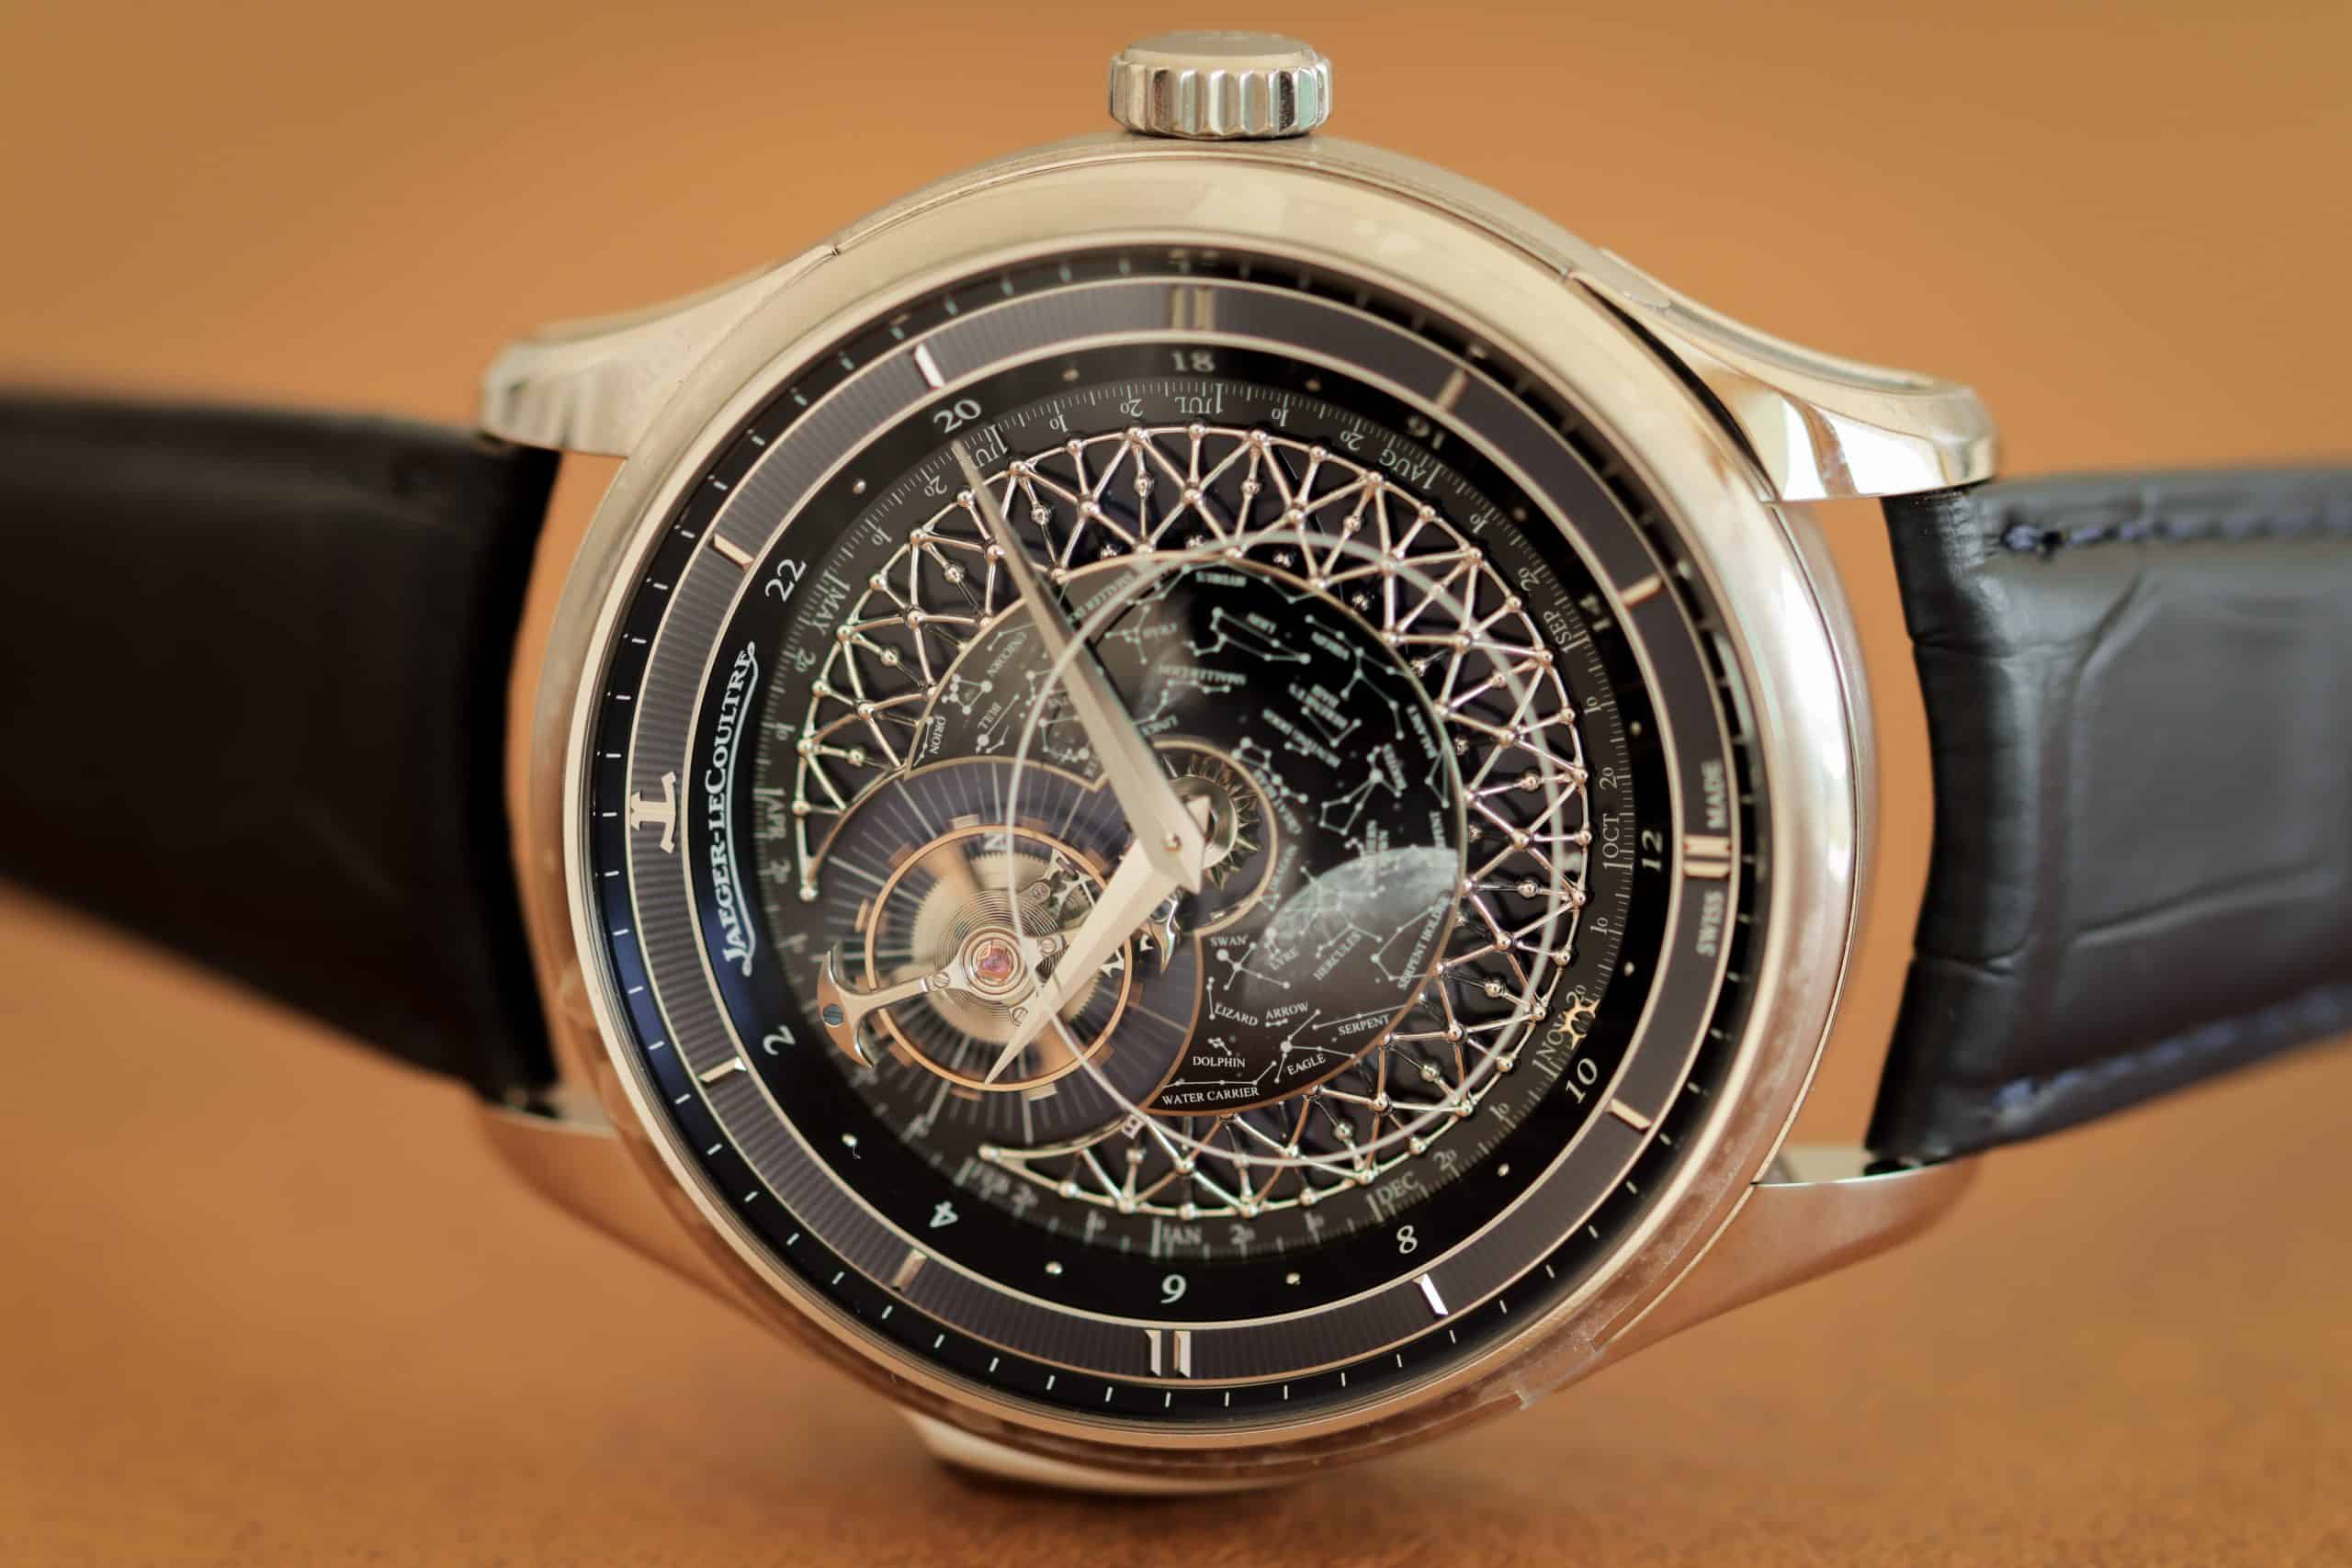 Jaeger-LeCoultre Polaris and more Watches & Wonders 2022 novelties